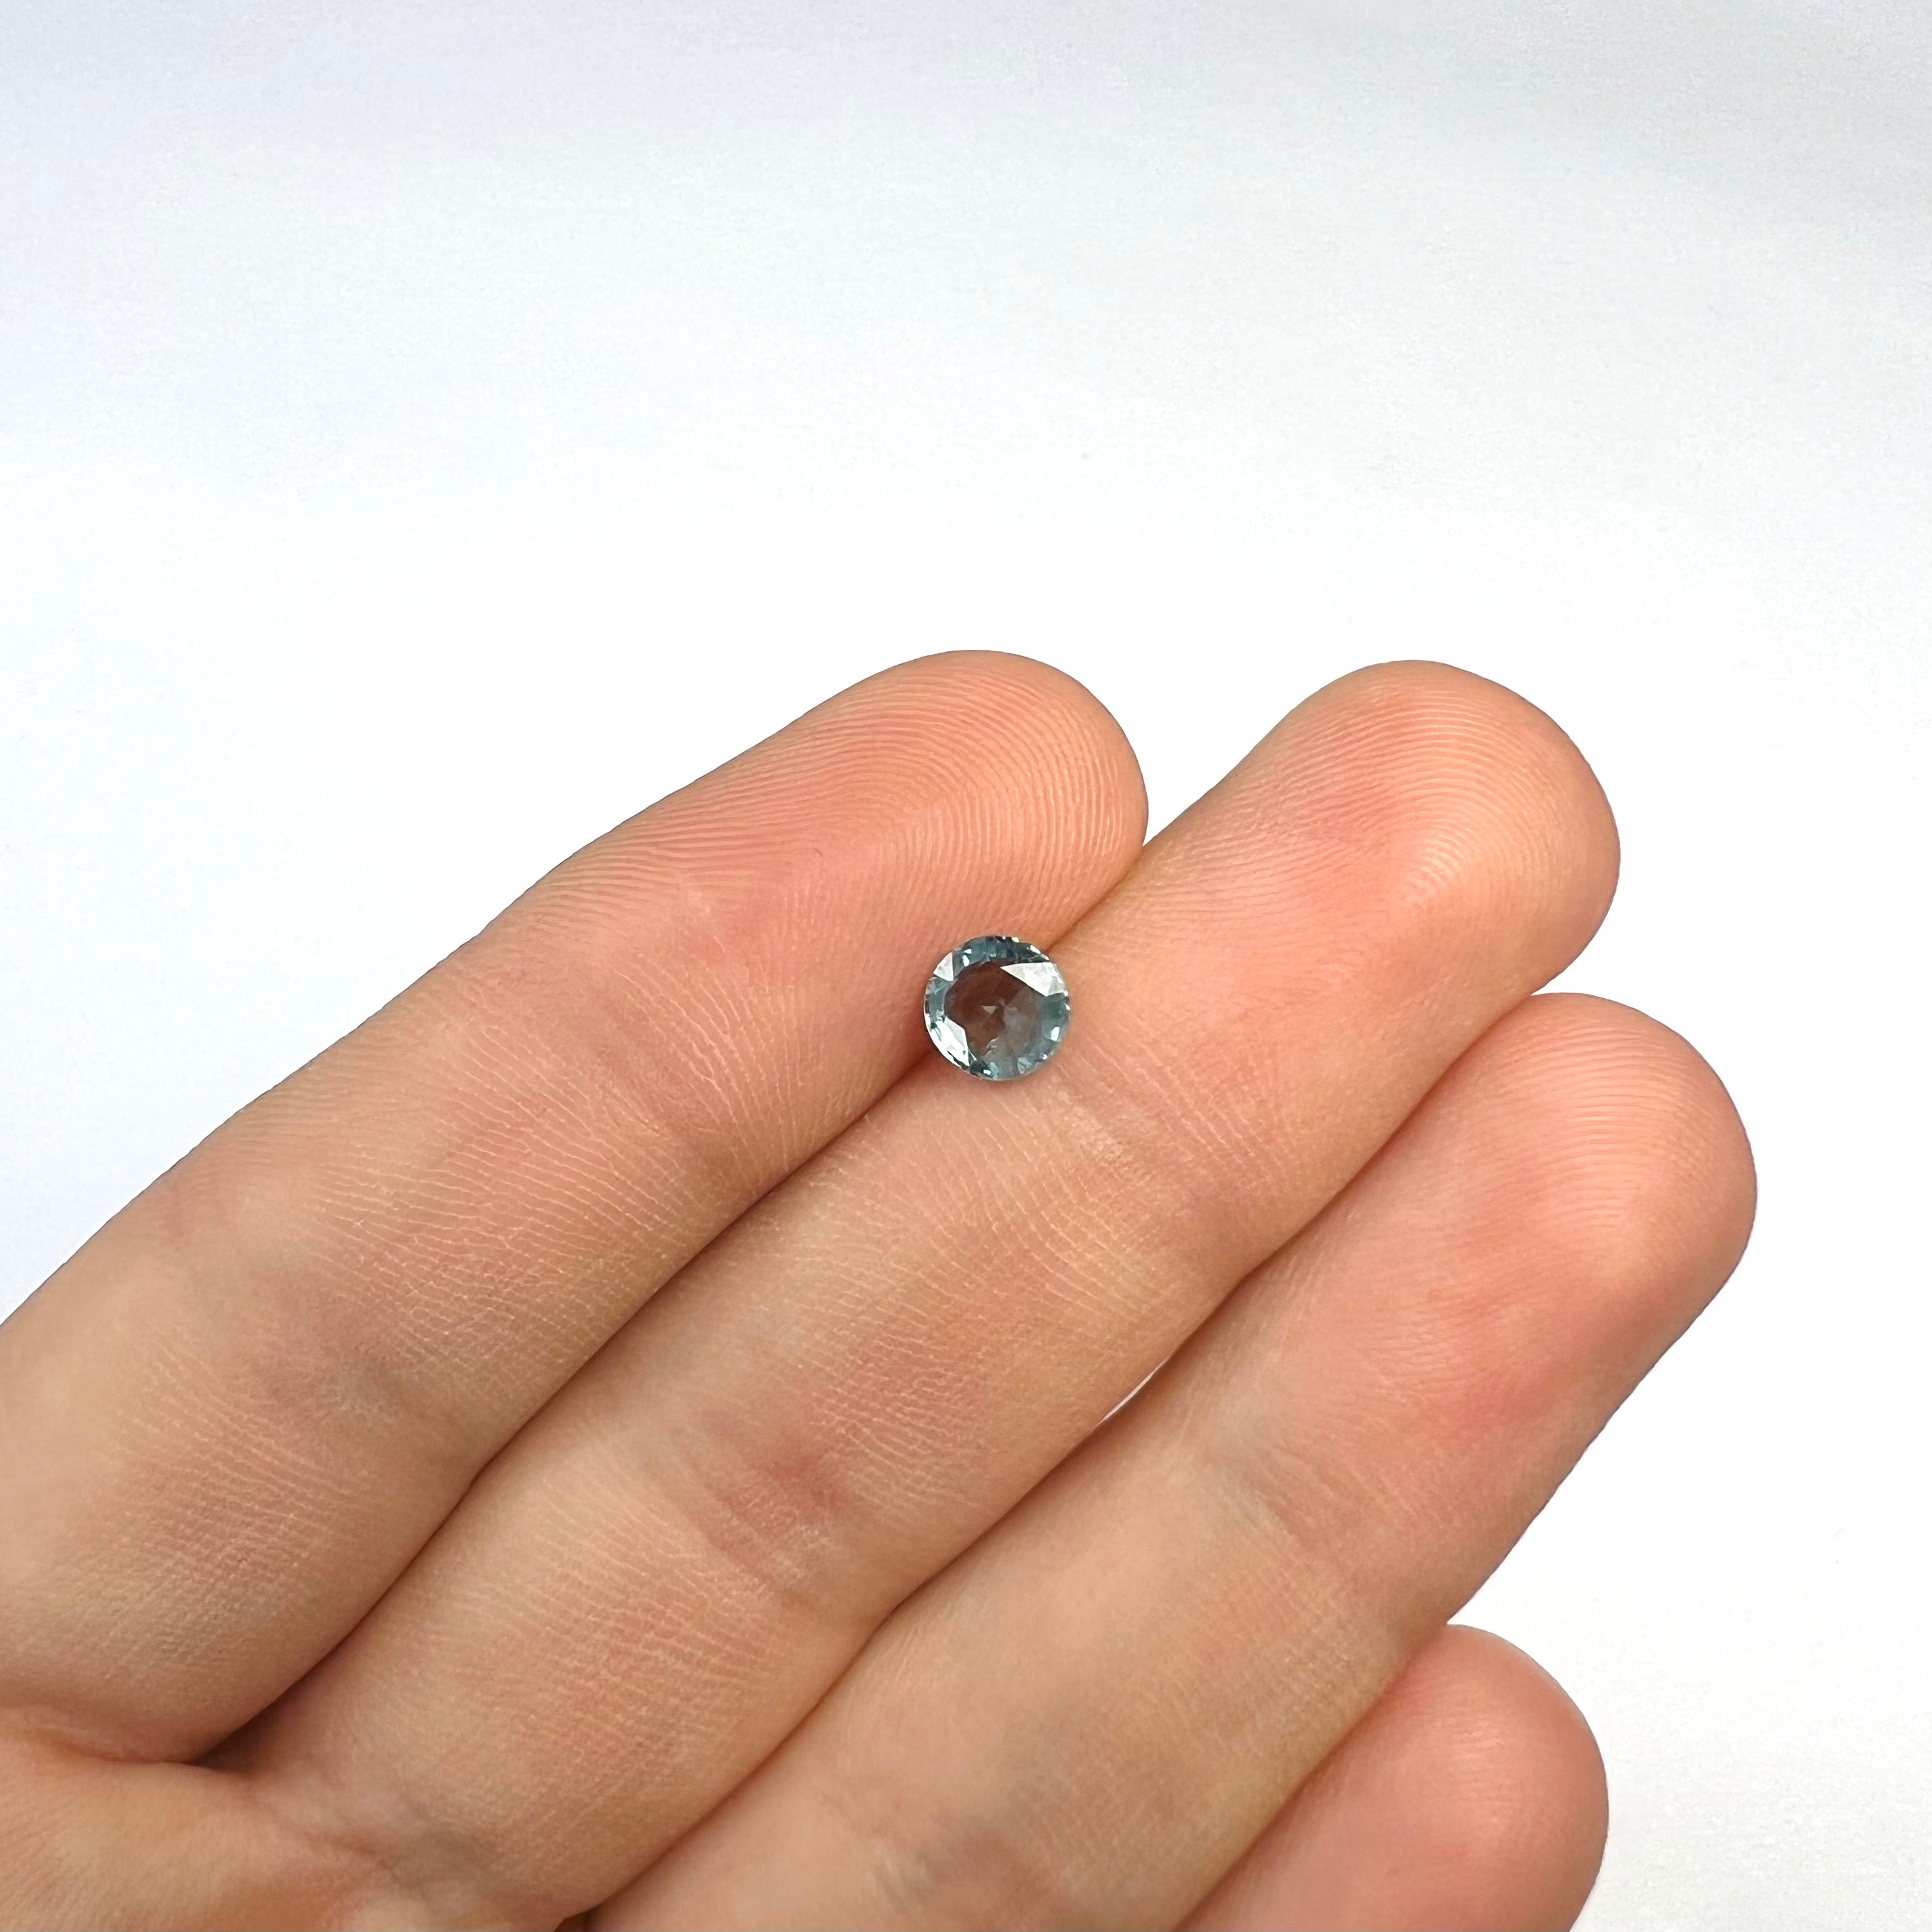 .93CTW Loose Round Blue Sapphire 5.74x2.92mm Earth mined Gemstone